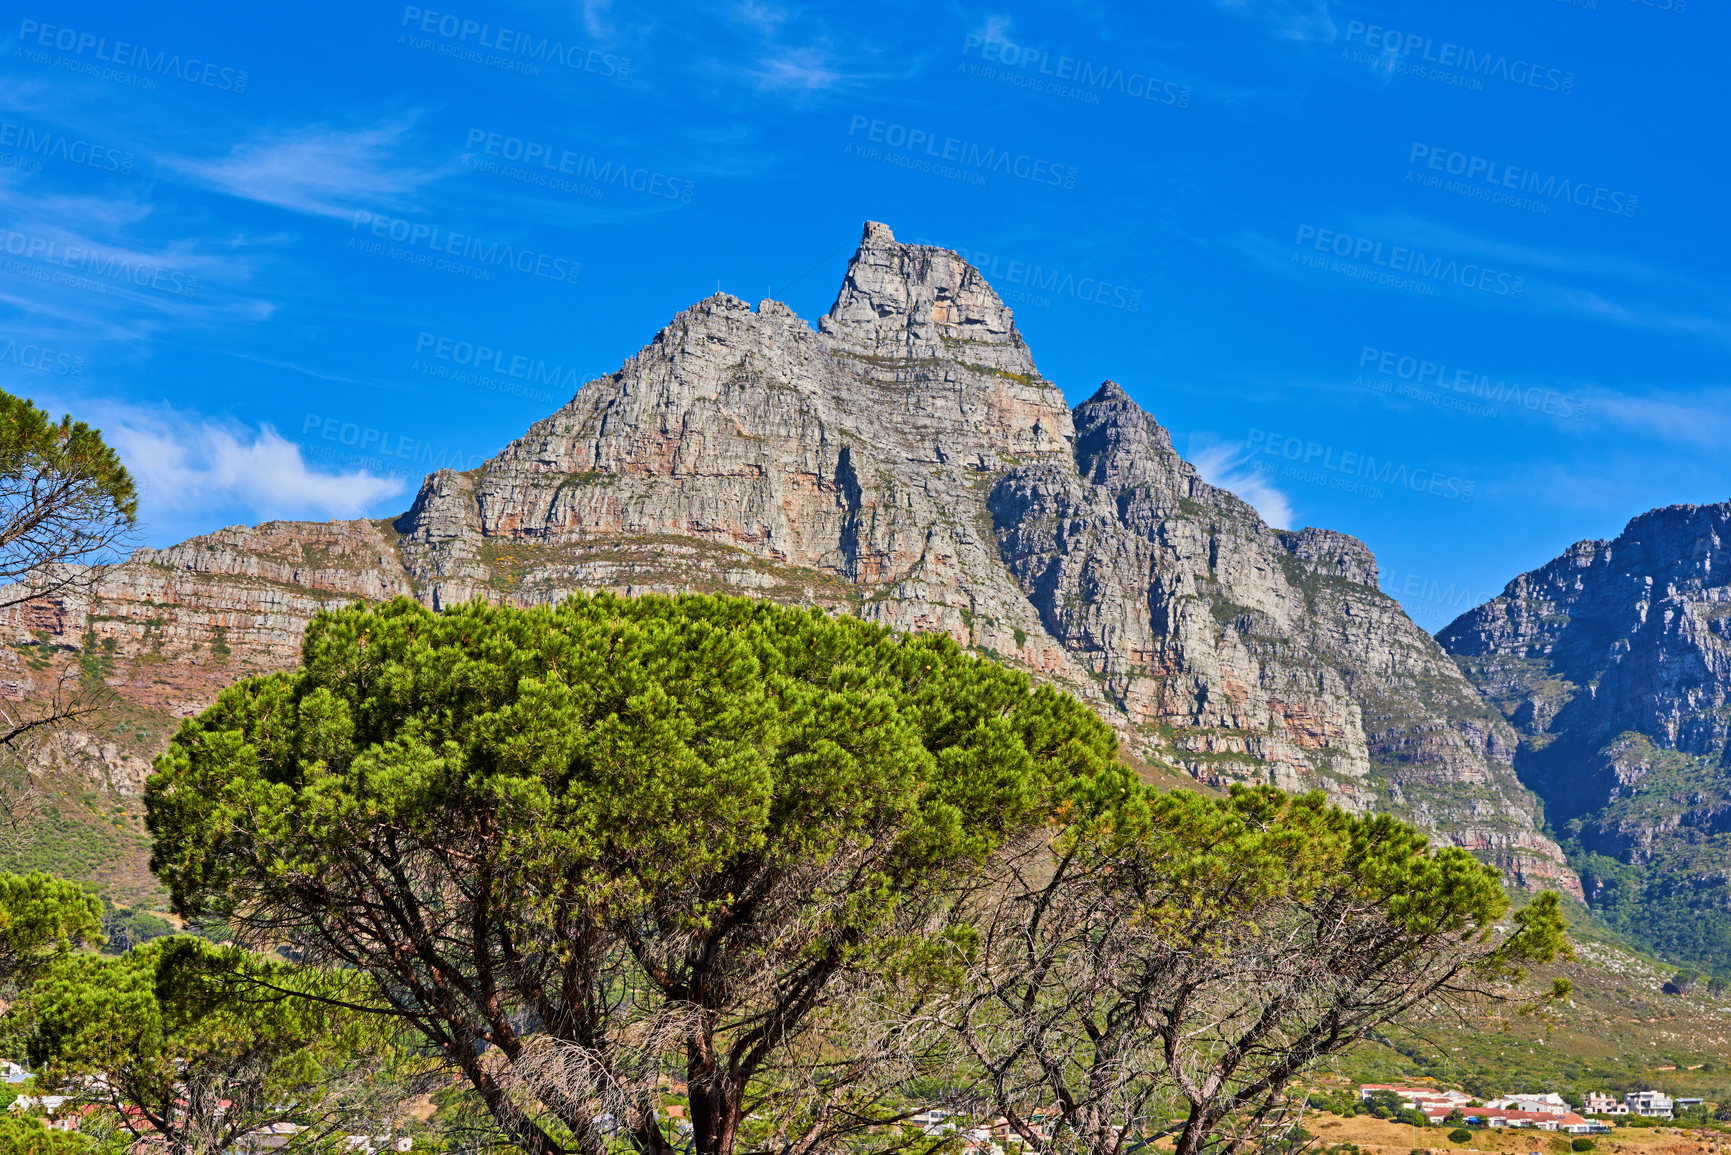 Buy stock photo A bottom view picture of Table mountain - South Africa. A beautiful nature view picture of a high mountain shaped like a lion's head with green trees and a town next to it. A mountain range is seen. 